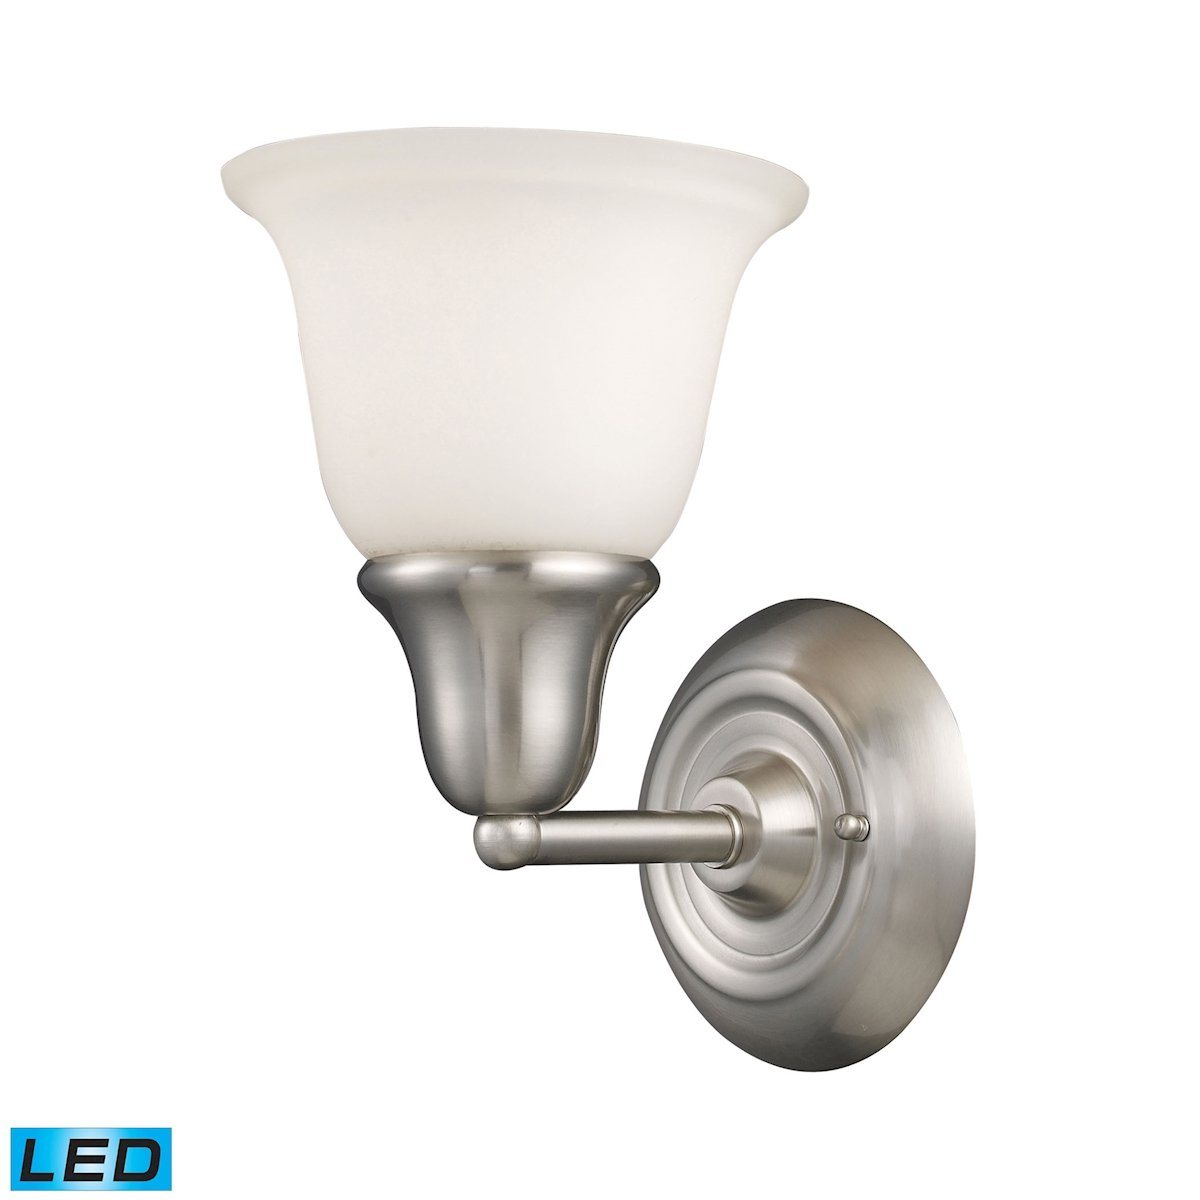 Berwick 1 Light LED Wall Sconce In Brushed Nickel And White Glass Wall Elk Lighting 